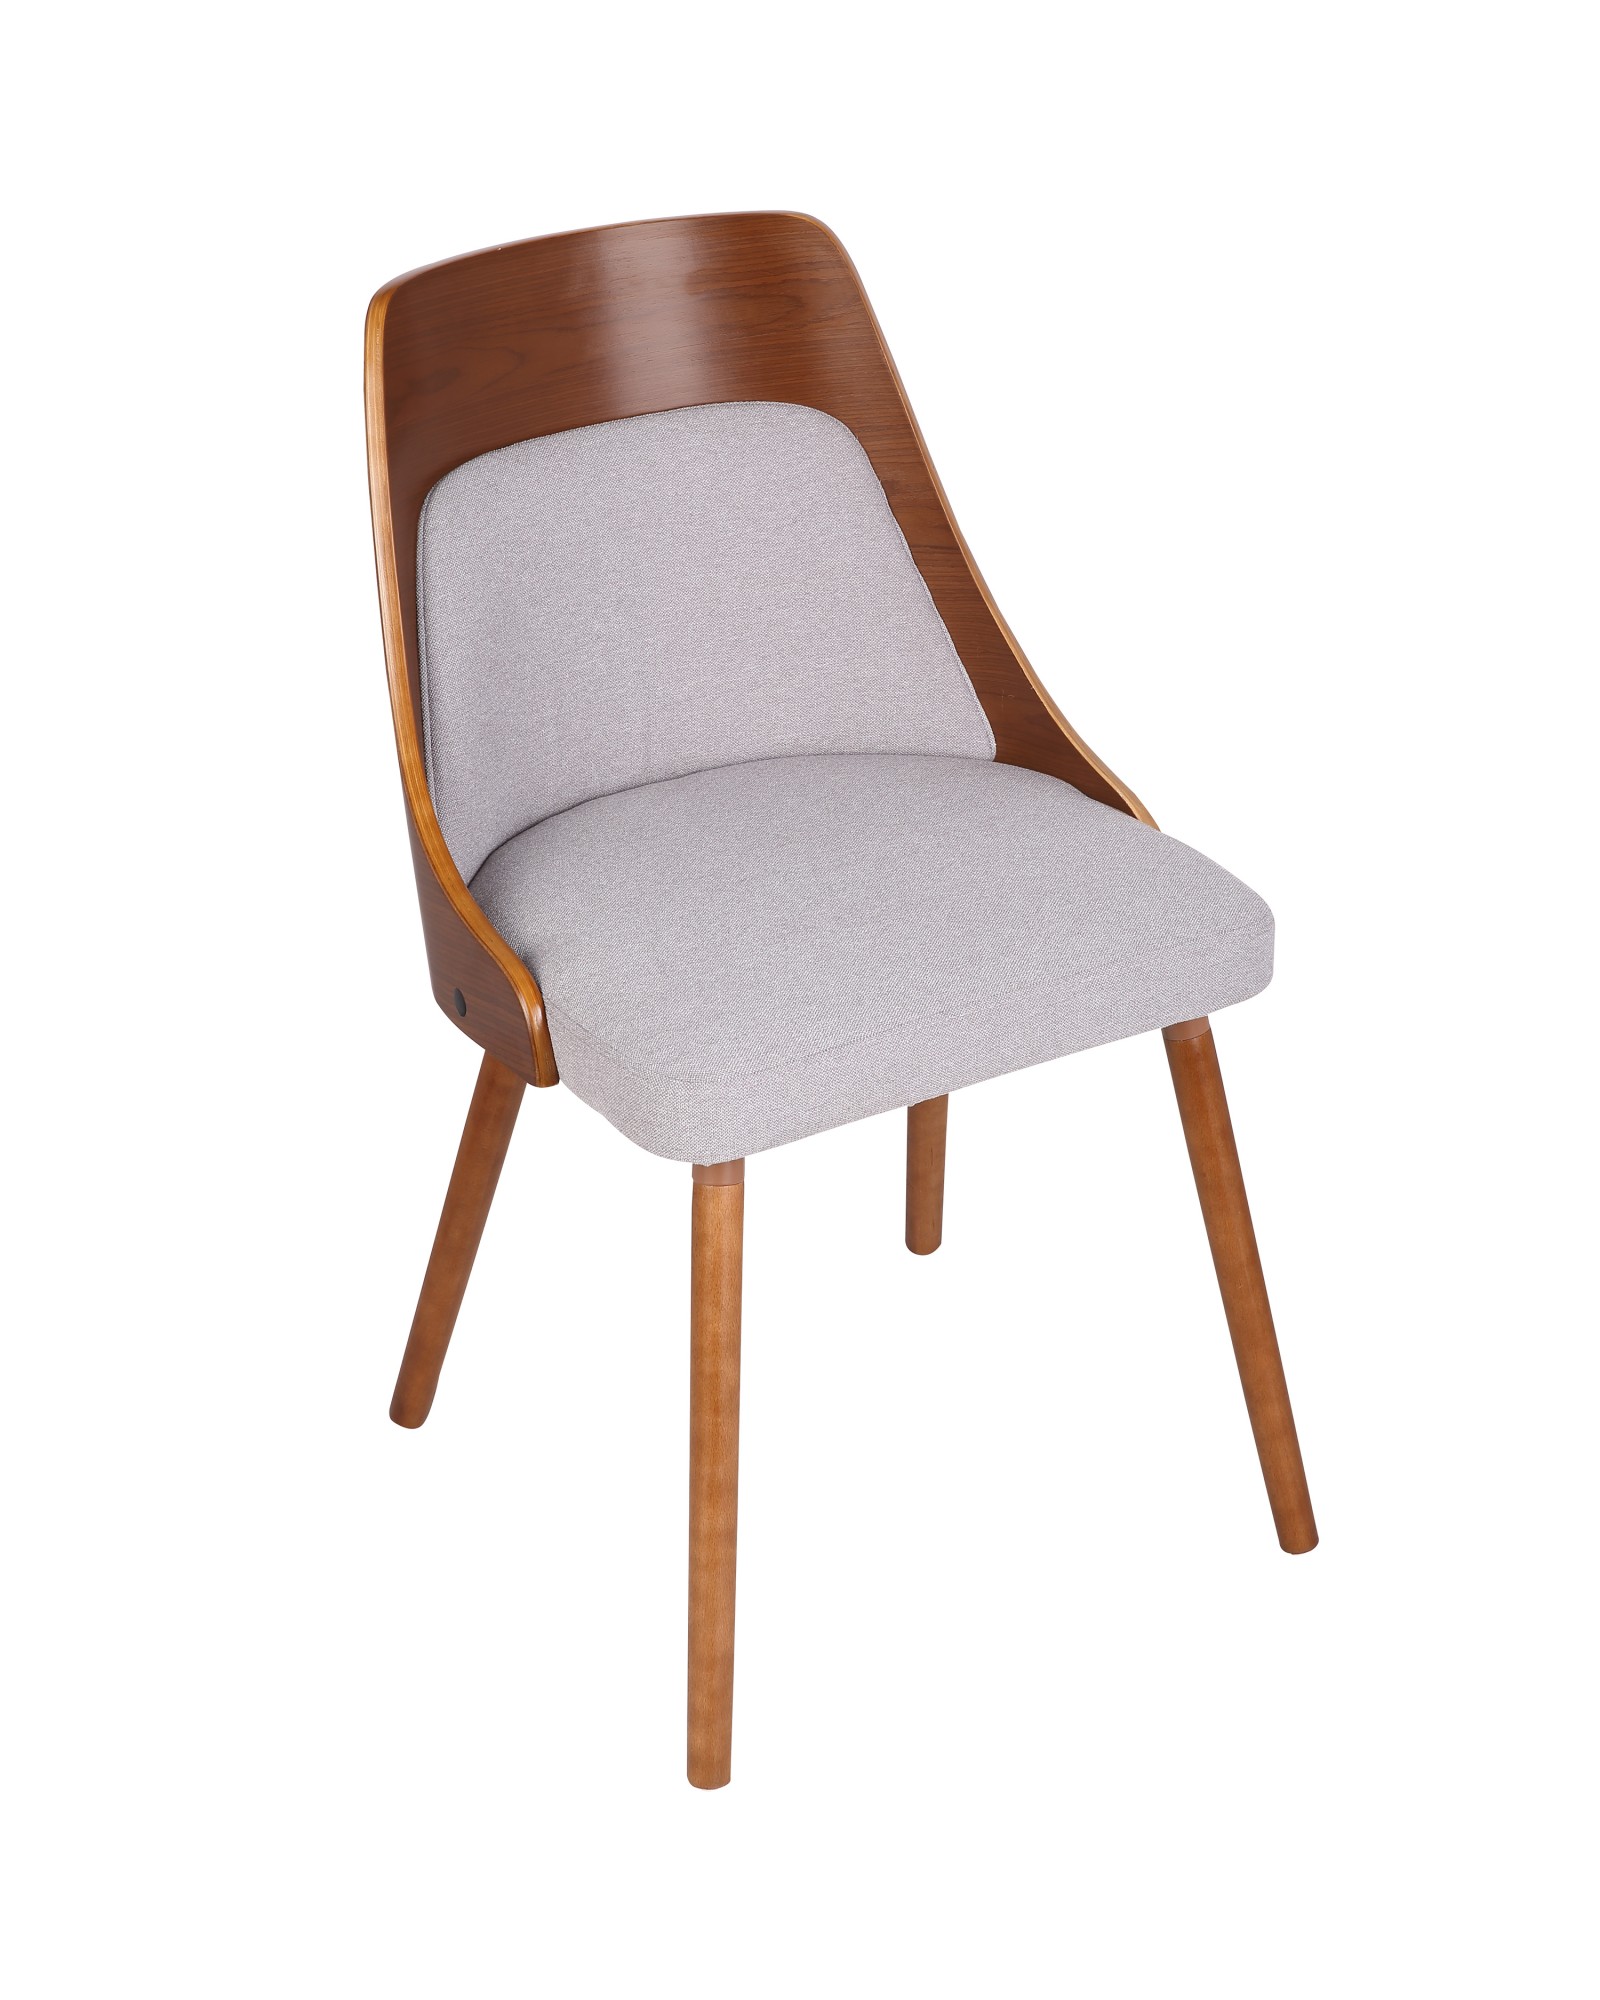 Anabelle Mid-Century Modern Dining/Accent Chair in Walnut and Grey Fabric